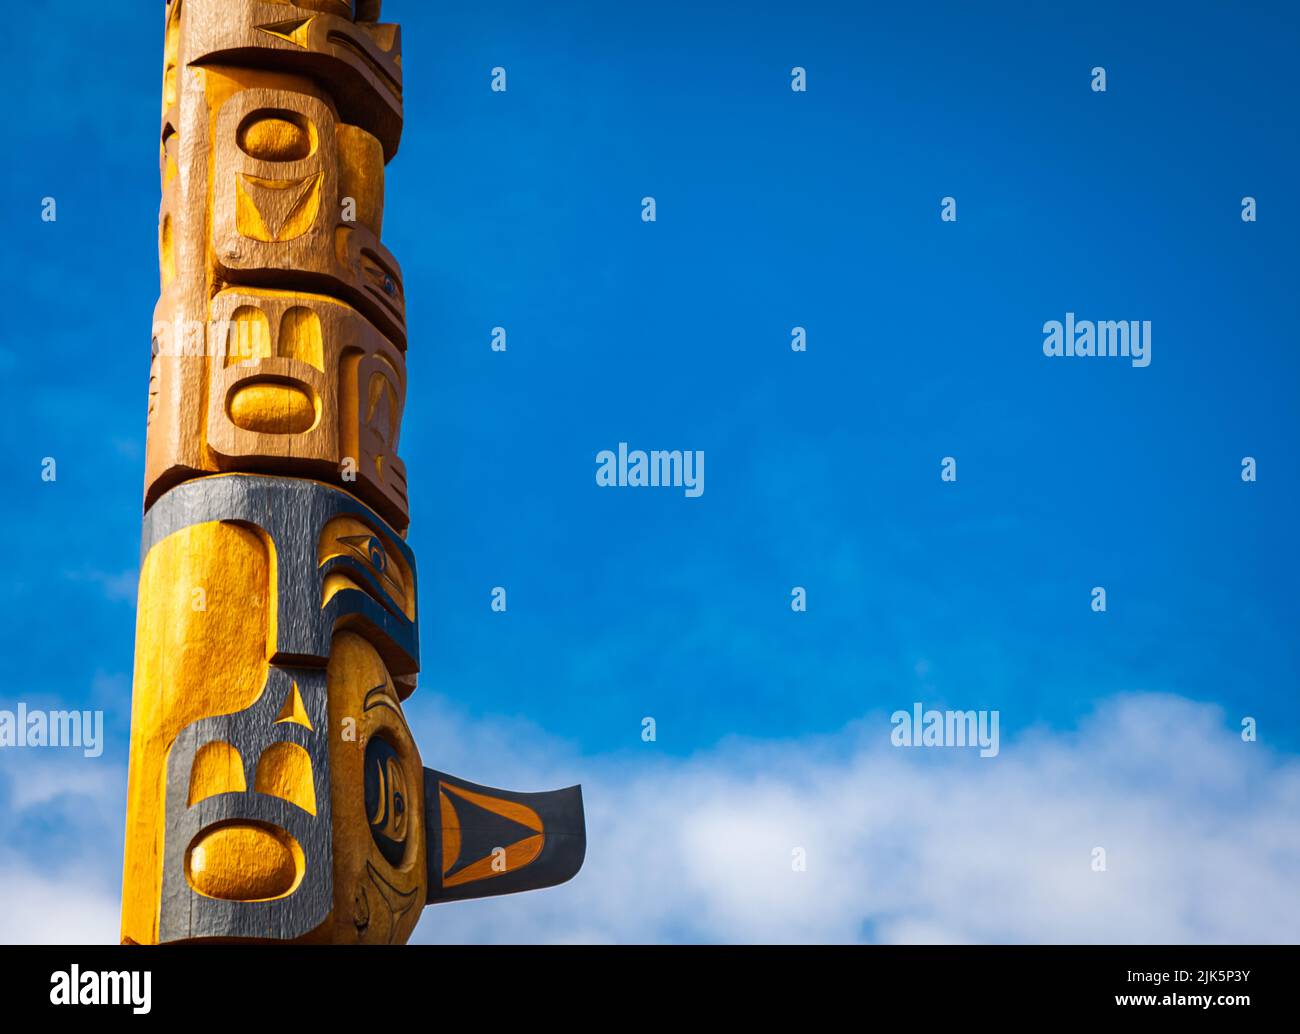 Isolated totem wood pole in blue sky background. Indian totem poles in park in Nanaimo, Canada. Travel photo, copy space for text, nobody Stock Photo